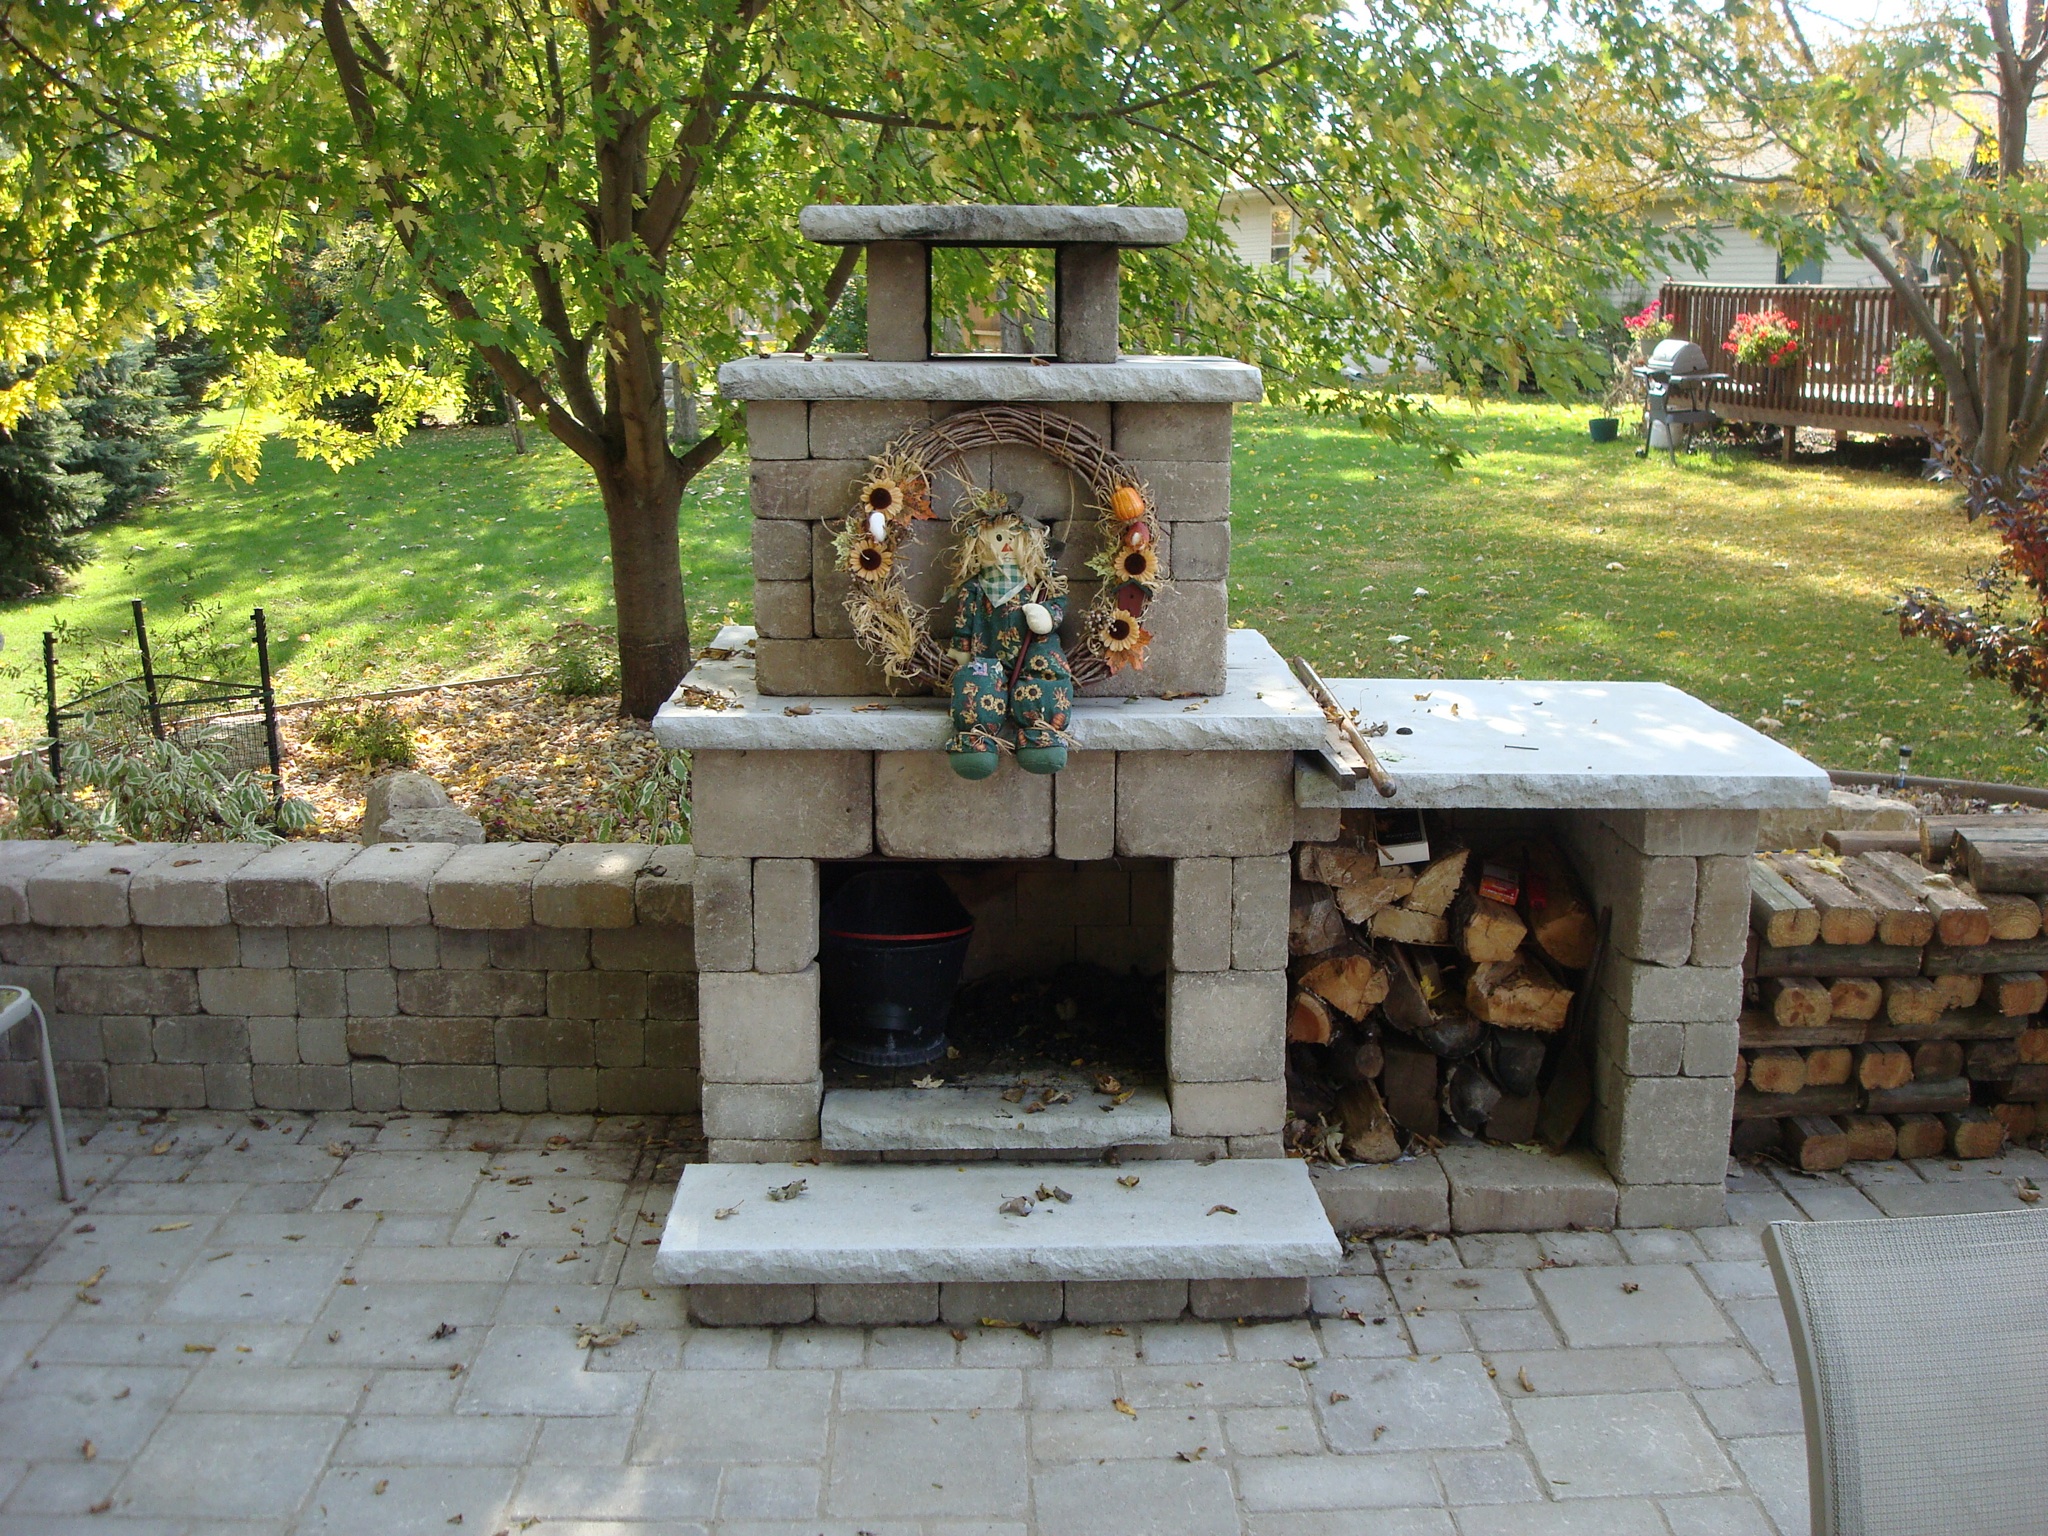 outdoor brick fireplace with two above shelf levels next to wood pile along sit wall